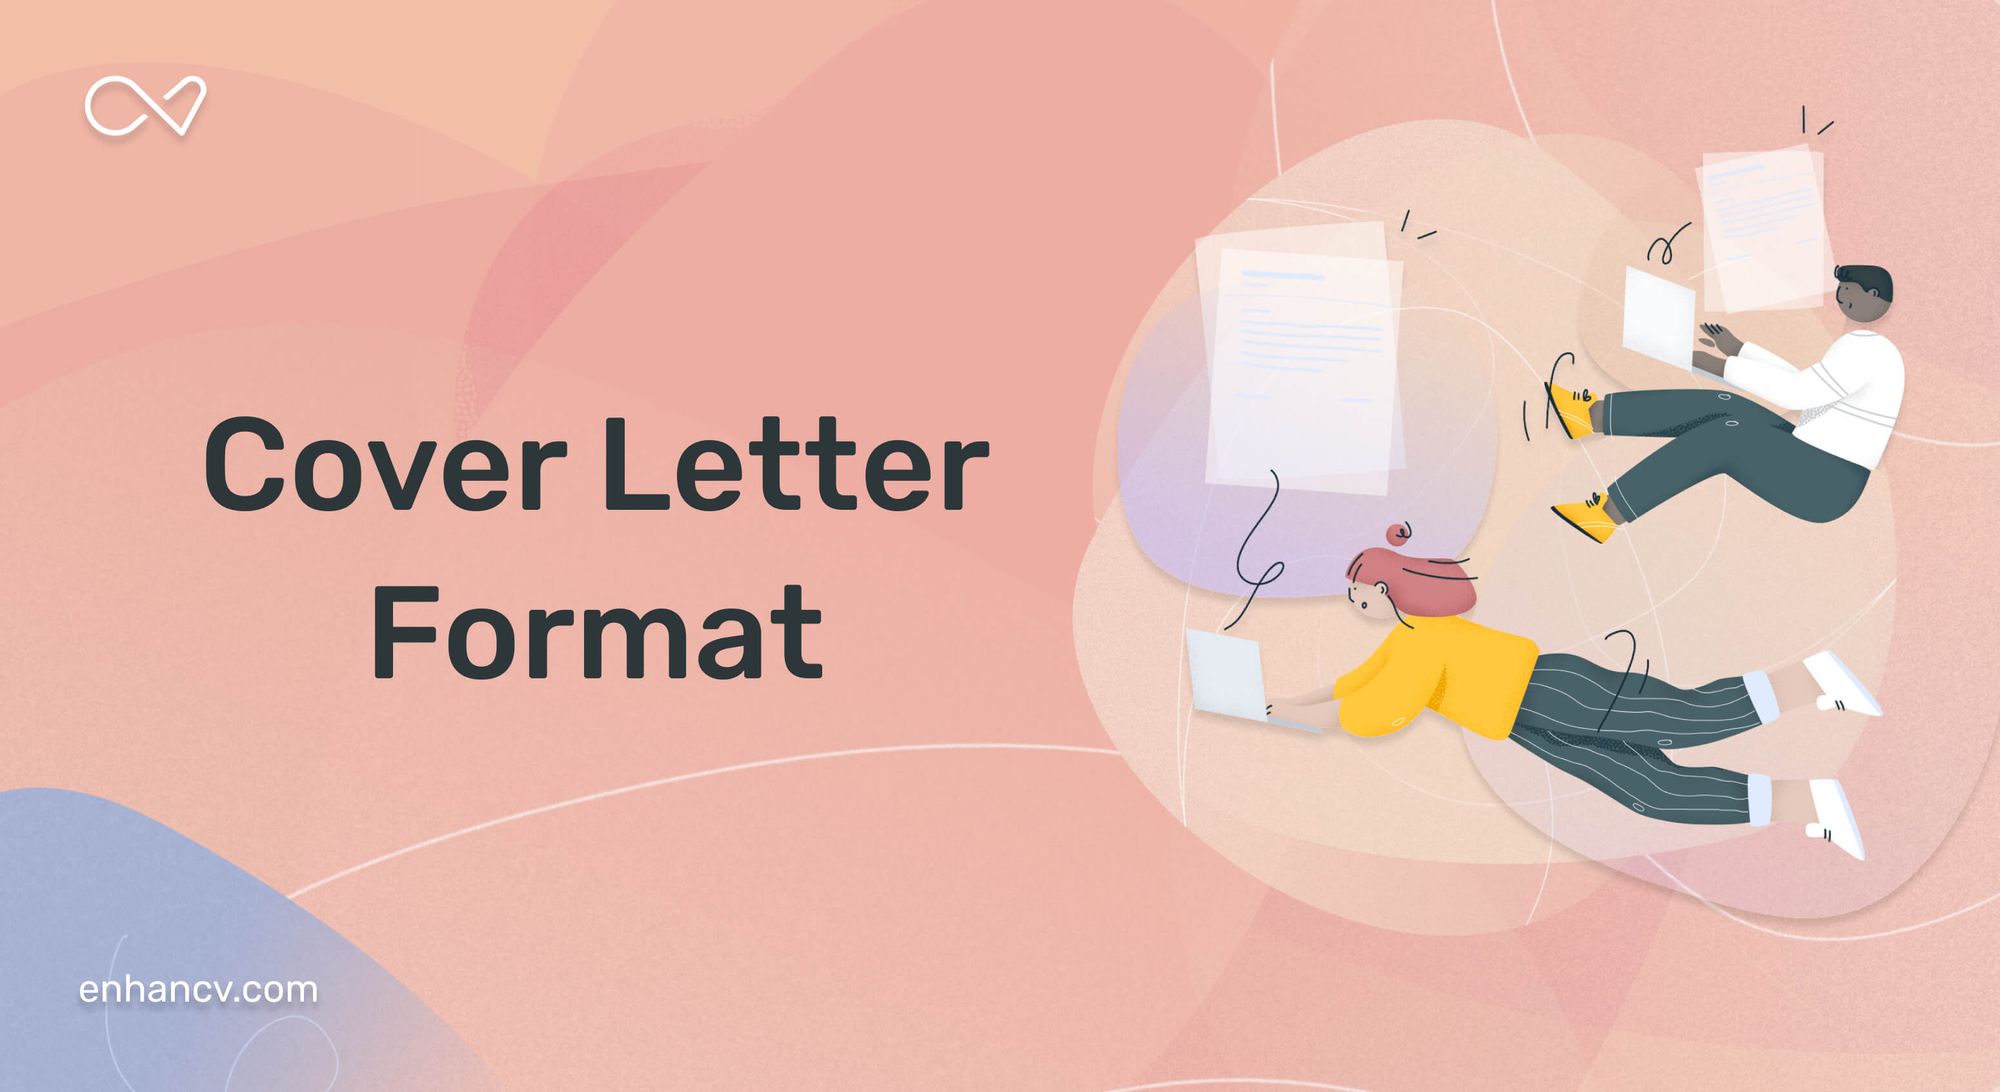 How to Format a Cover Letter